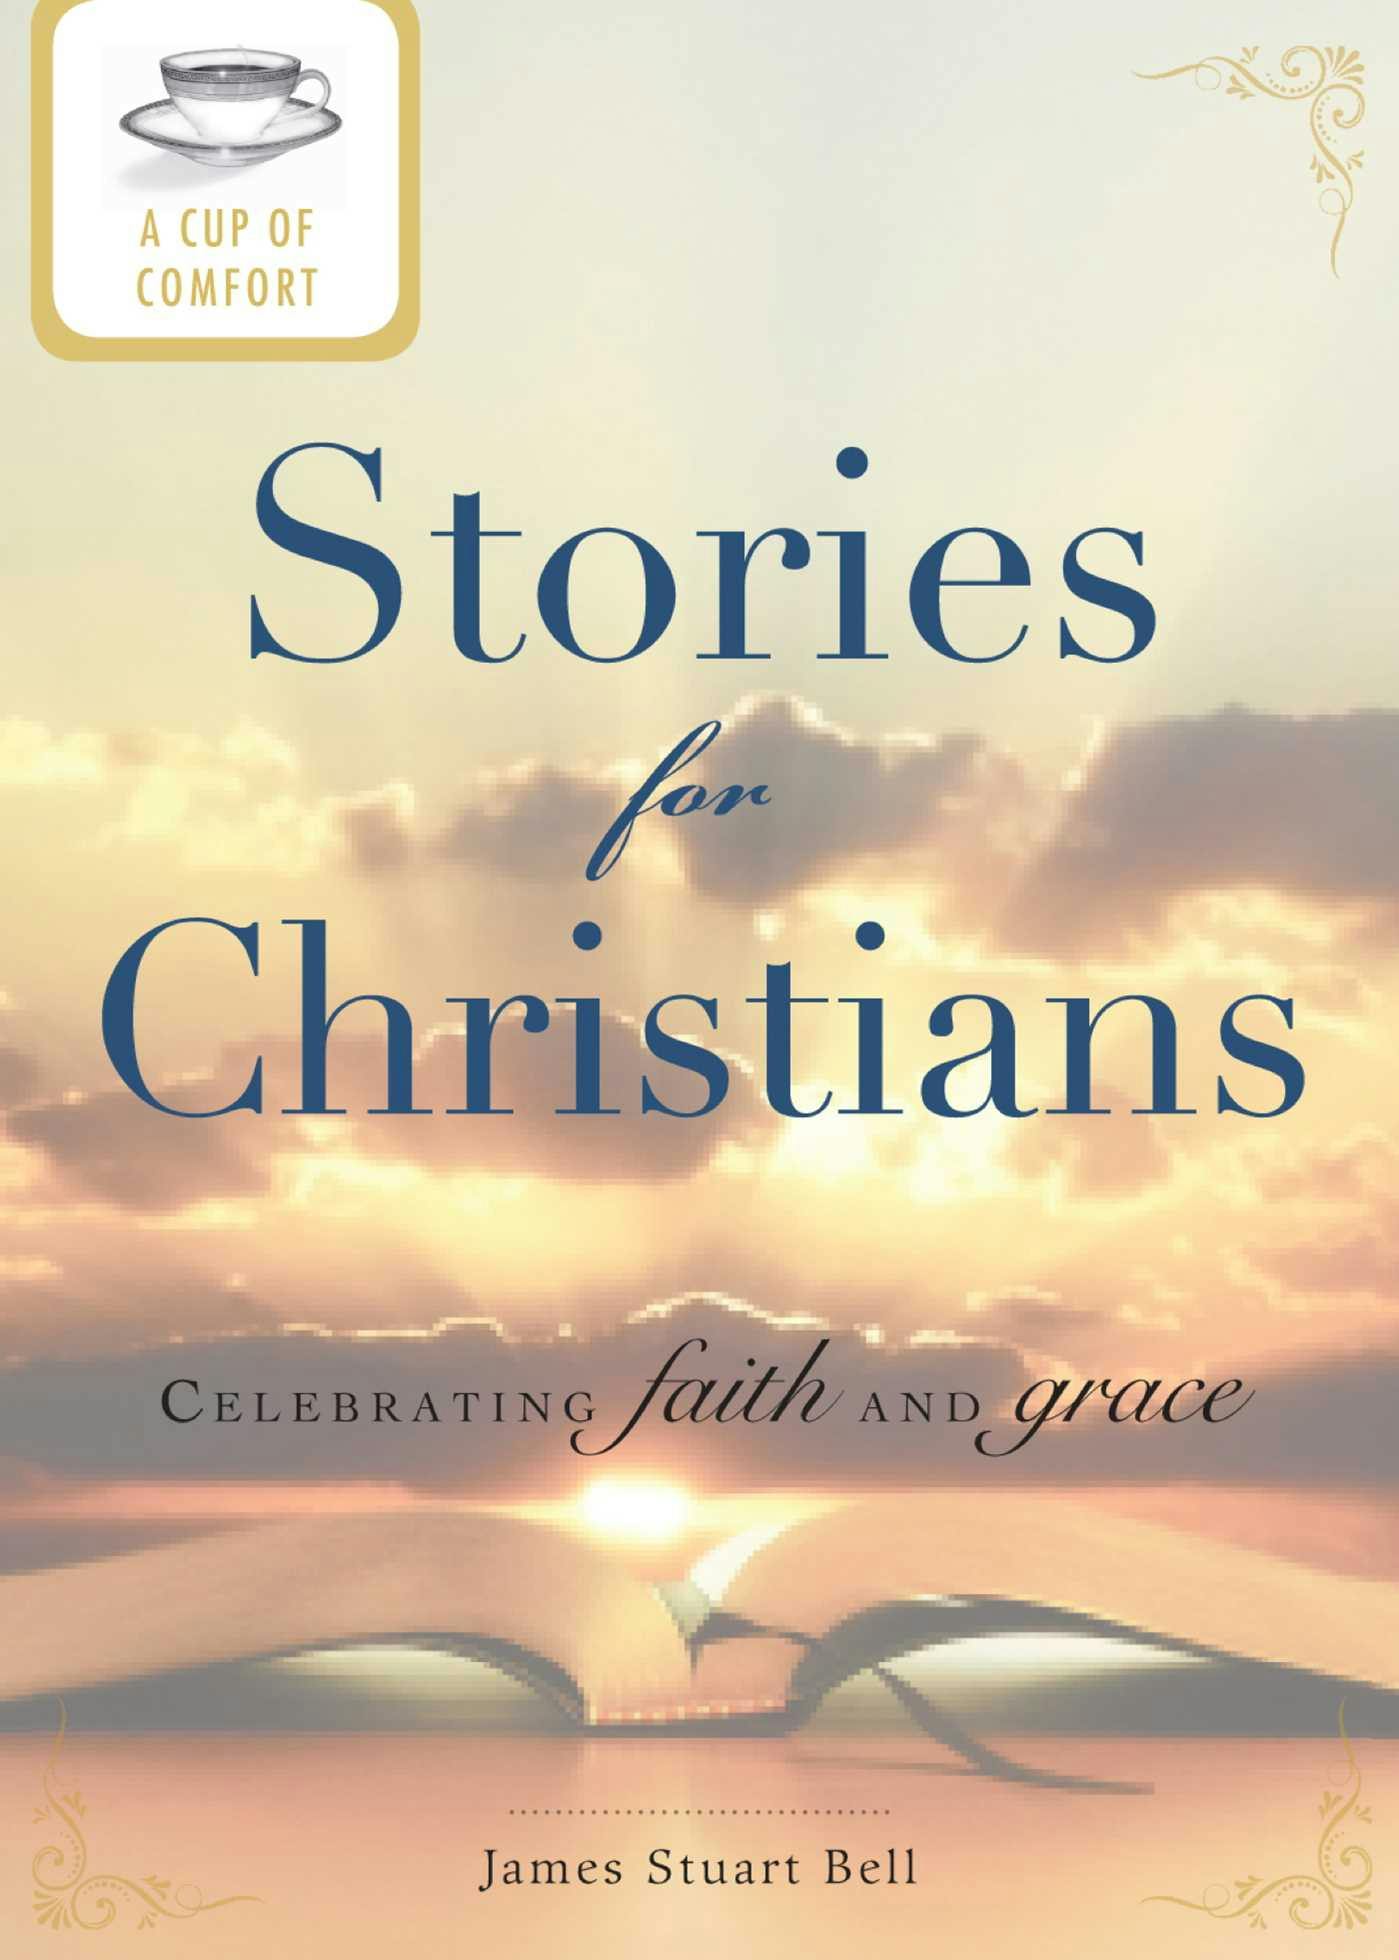 A Cup of Comfort Stories for Christians: Celebrating faith and grace - James Stuart Bell